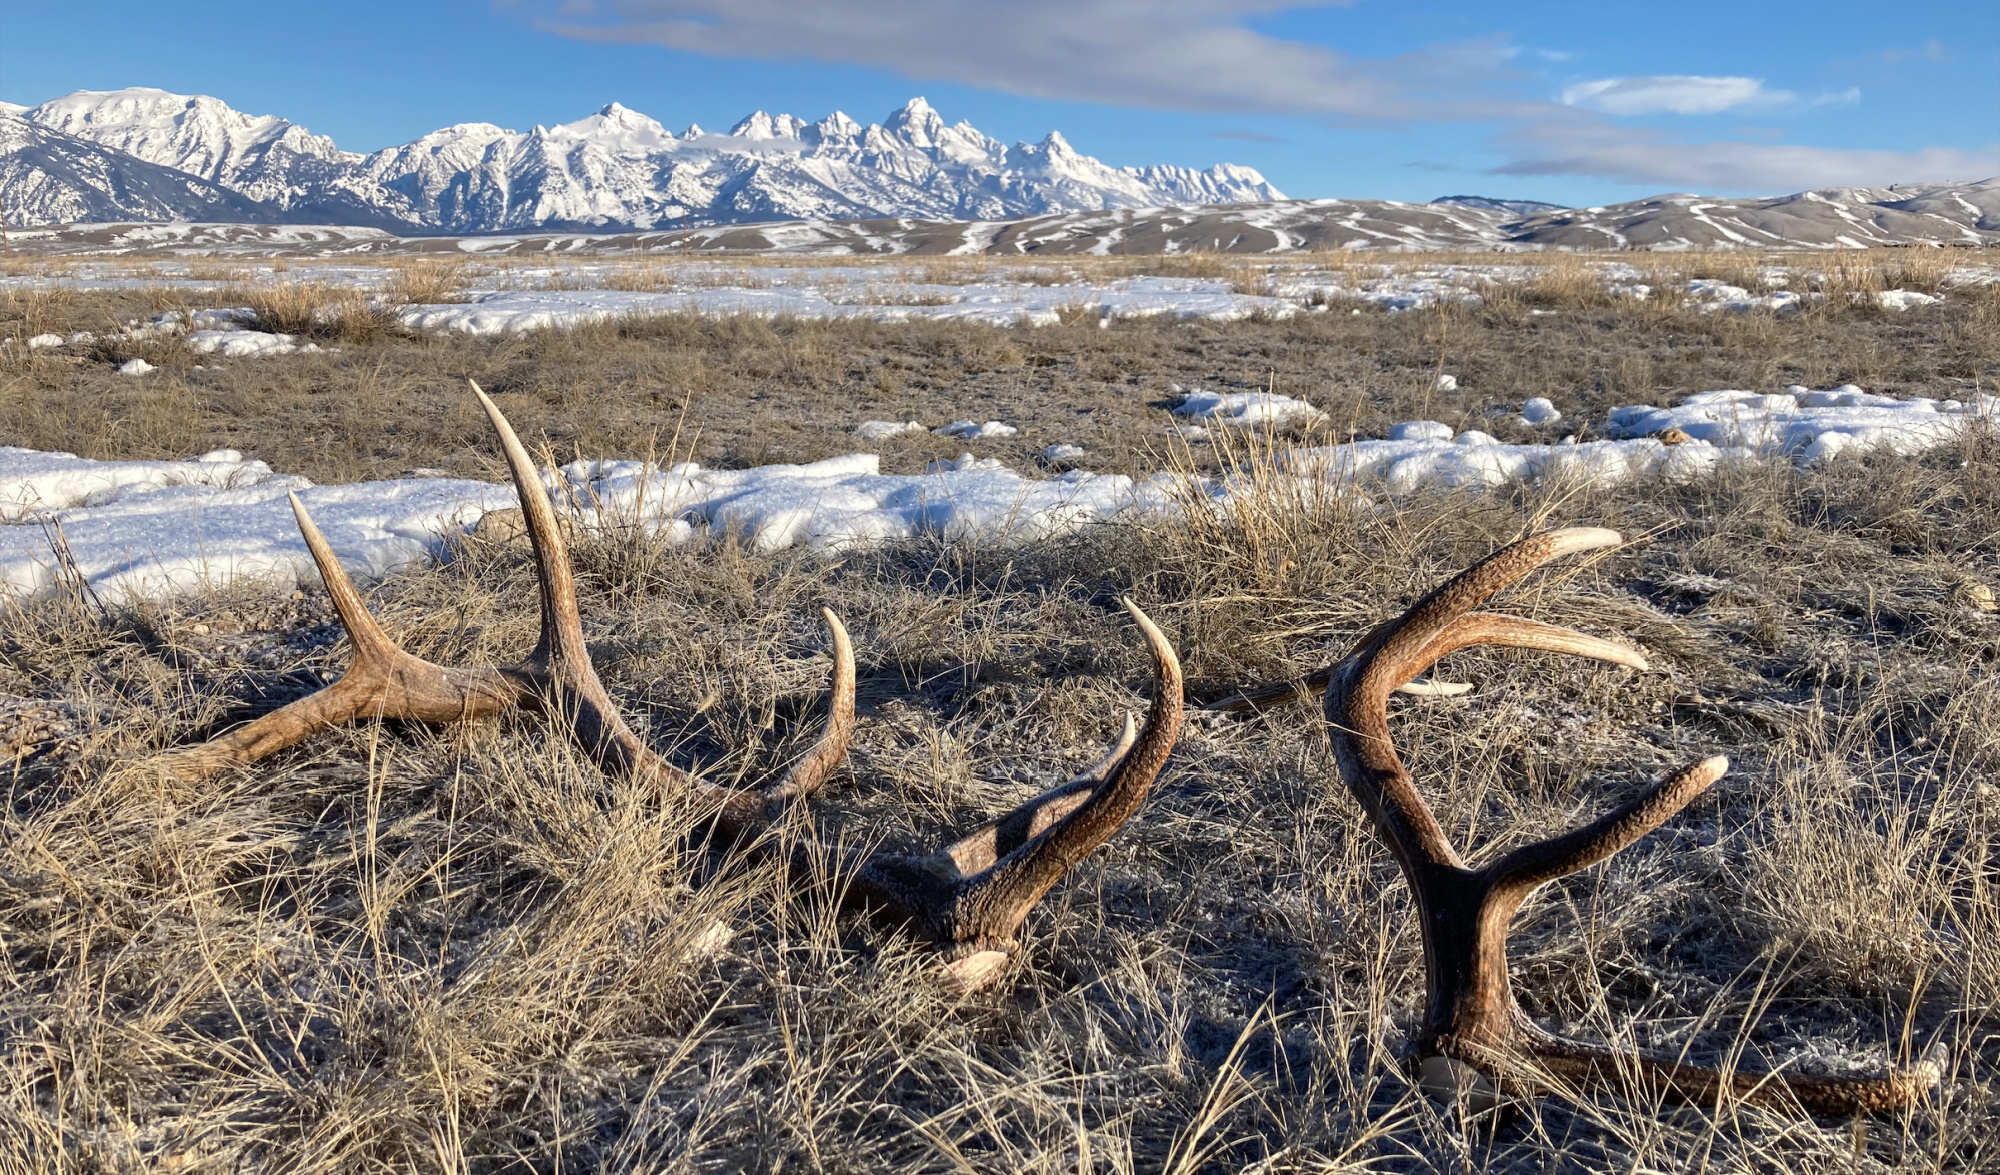 Antler Dealer Busted for Burying Shed Caches on Public Land Receives 5-Year Hunting Ban